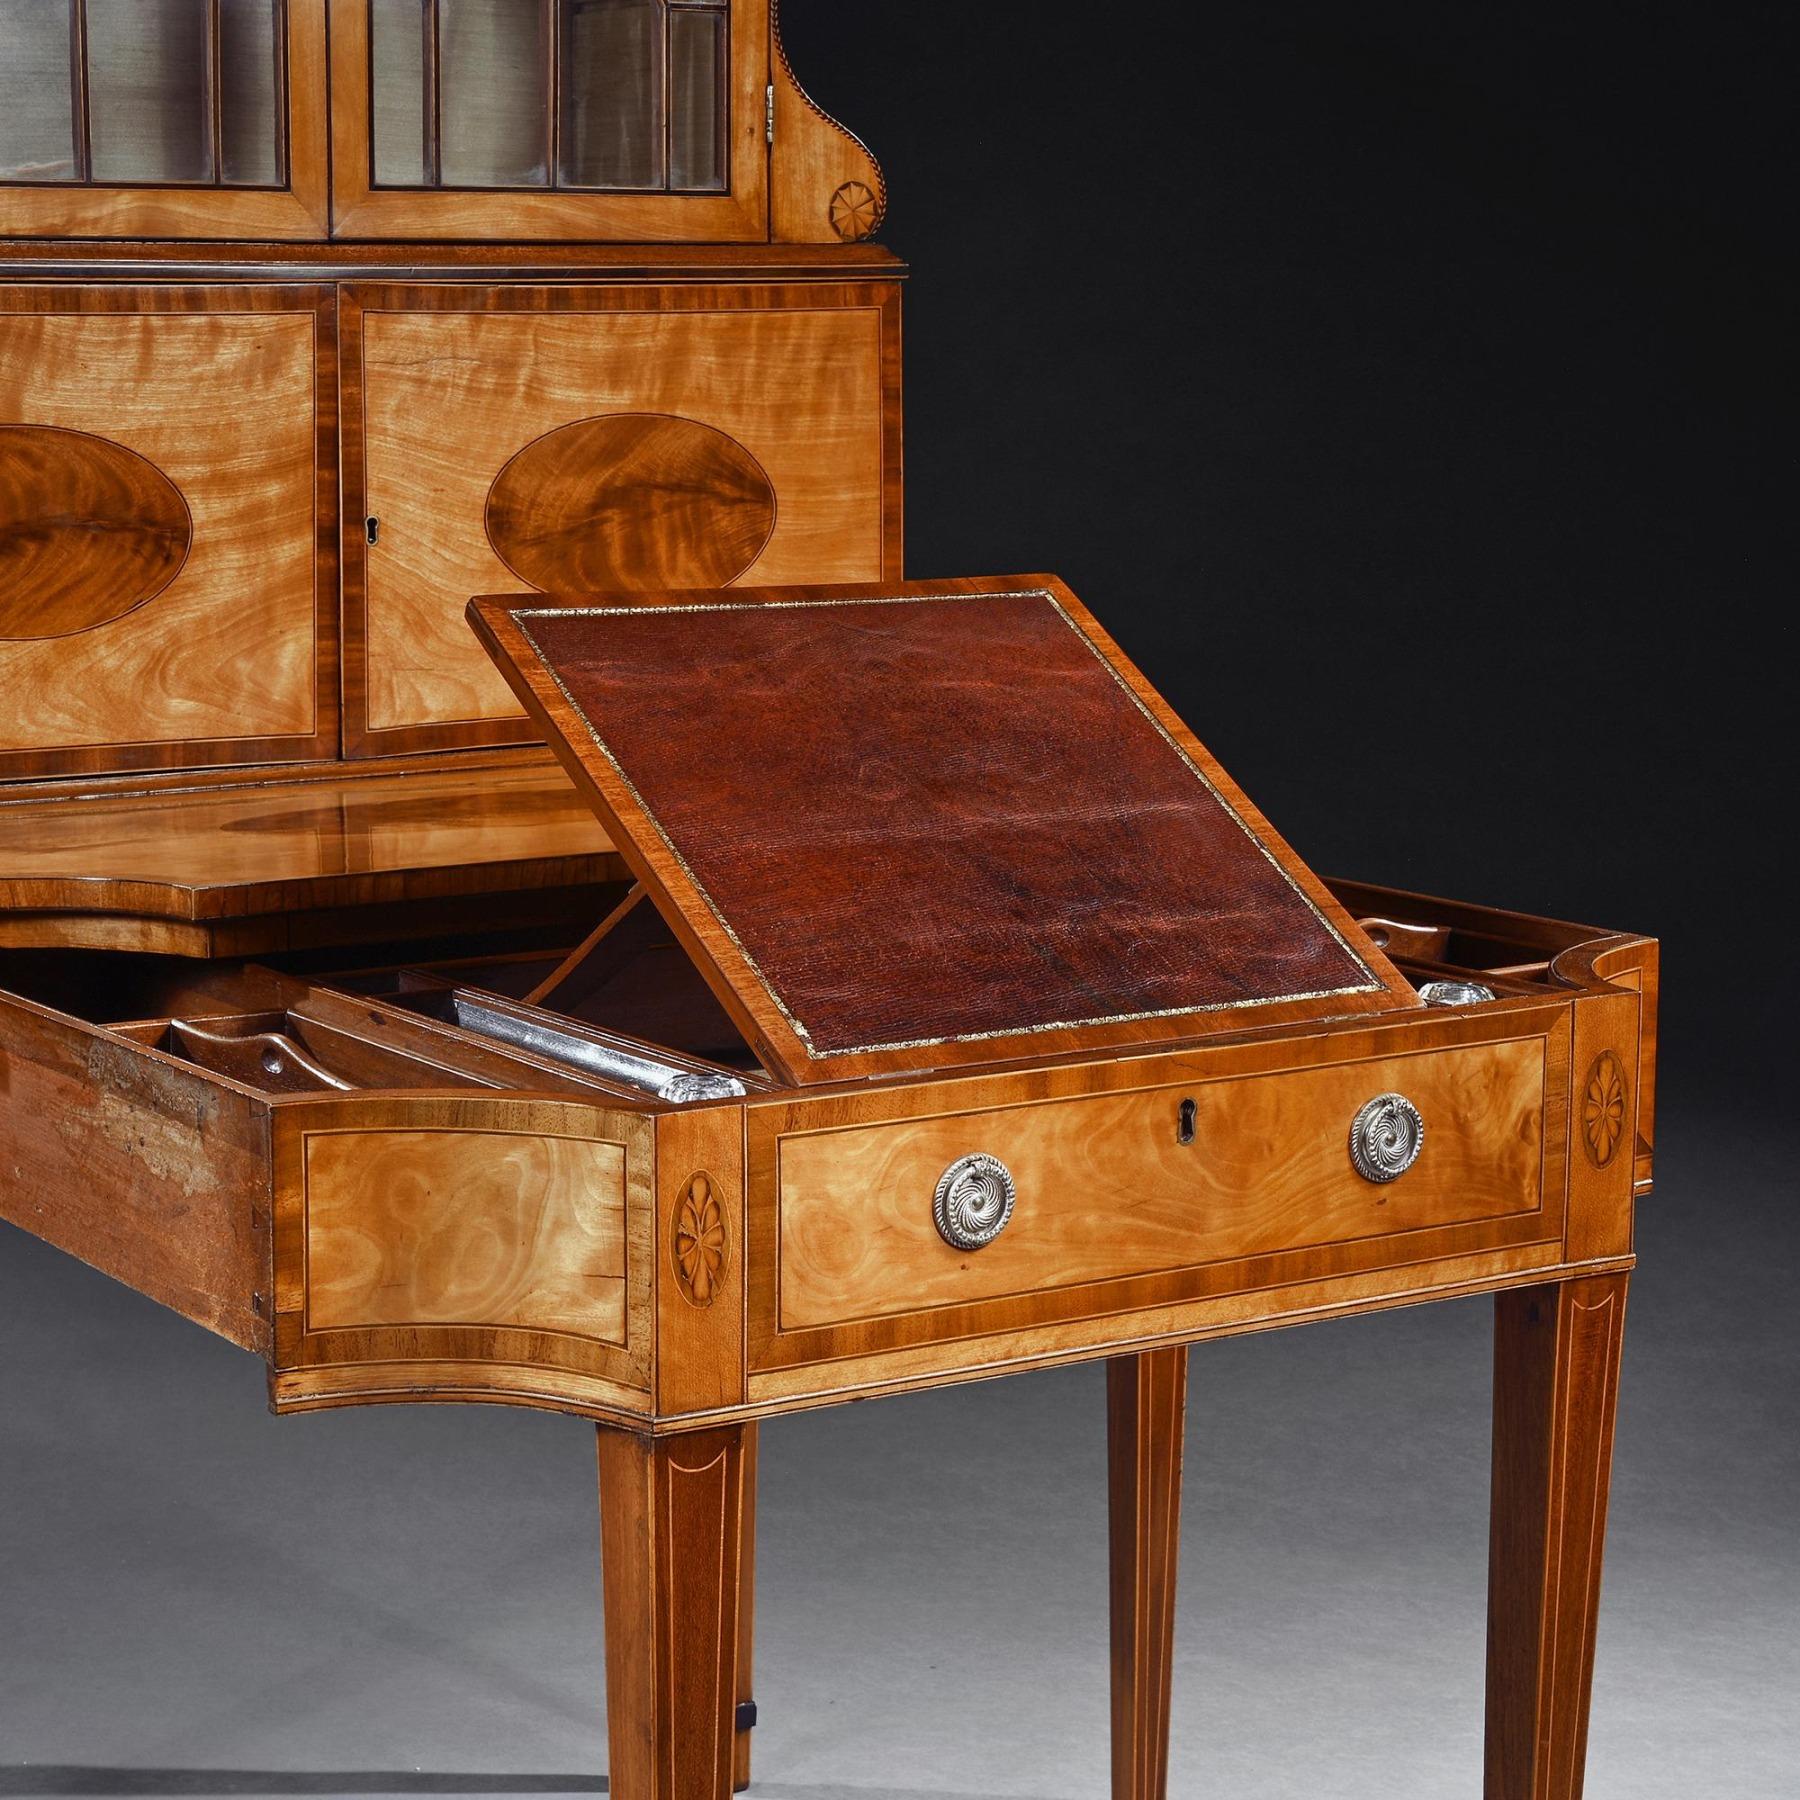  An Important 18th Century George Iii Satinwood and Sabicu Writing Cabinet For Sale 1